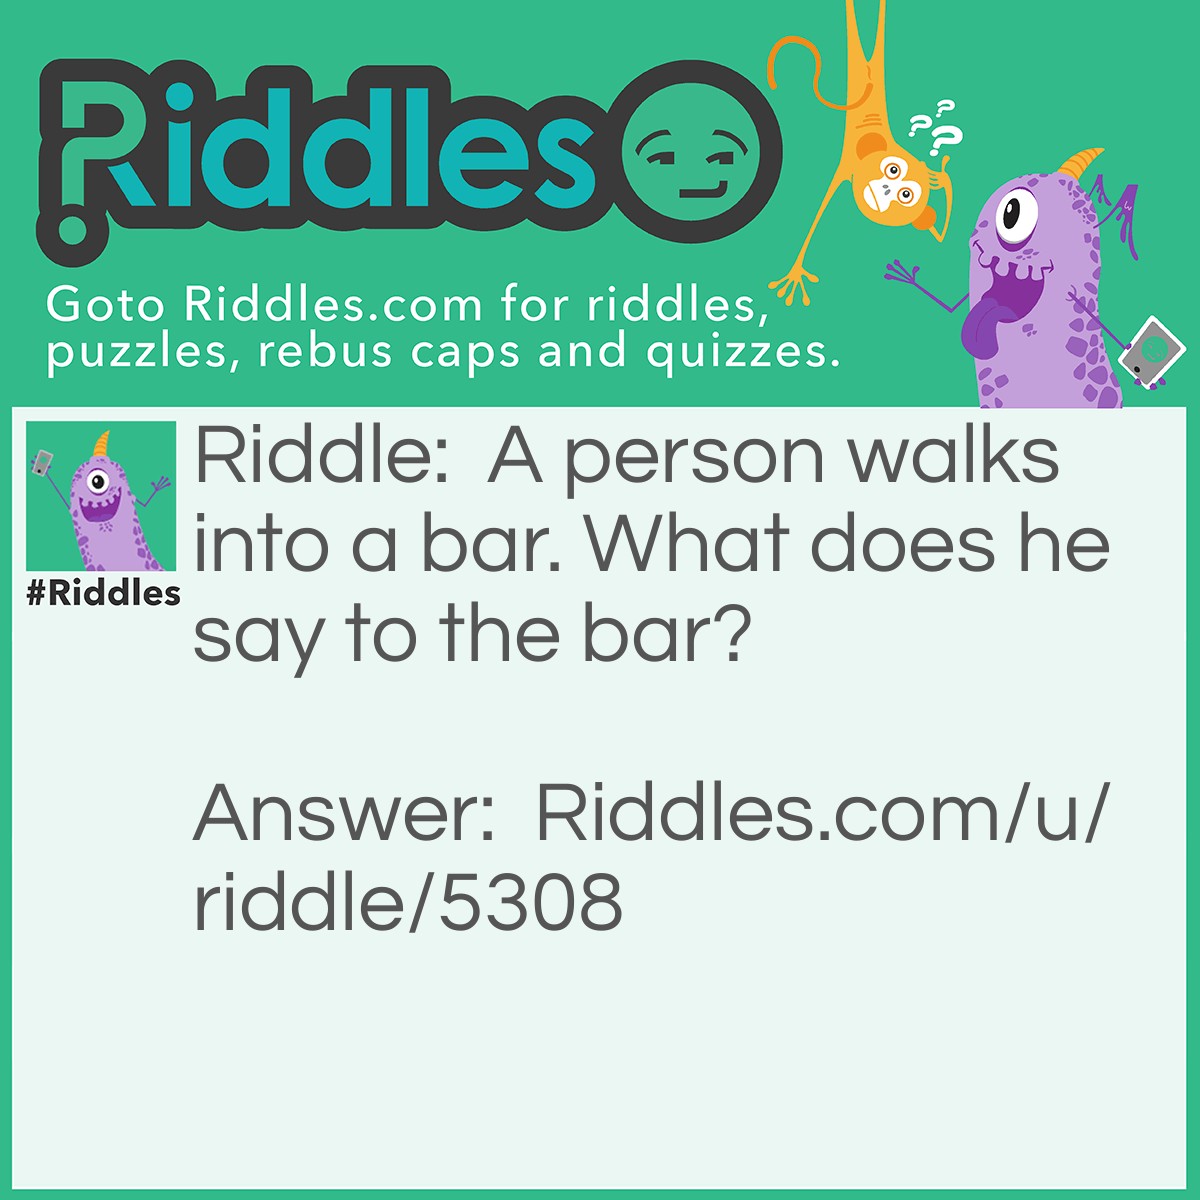 Riddle: A person walks into a bar. What does he say to the bar? Answer: Ouch! because he walked into a literal bar.